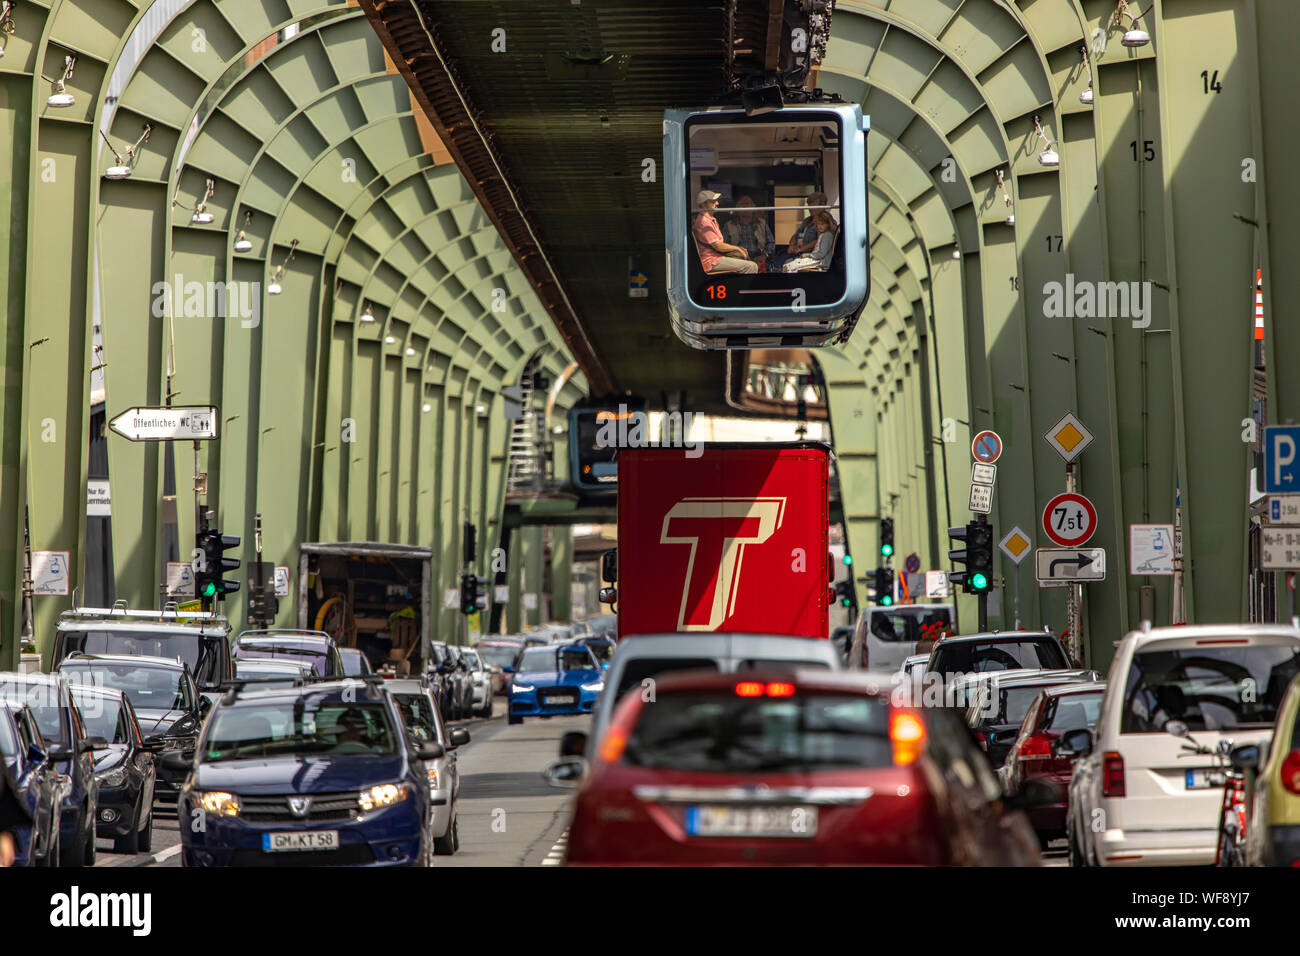 The Wuppertal suspension railway, train of the latest generation #15, downtown, over Kaiserstrasse street, in Wuppertal-Vohwinkel district, Stock Photo